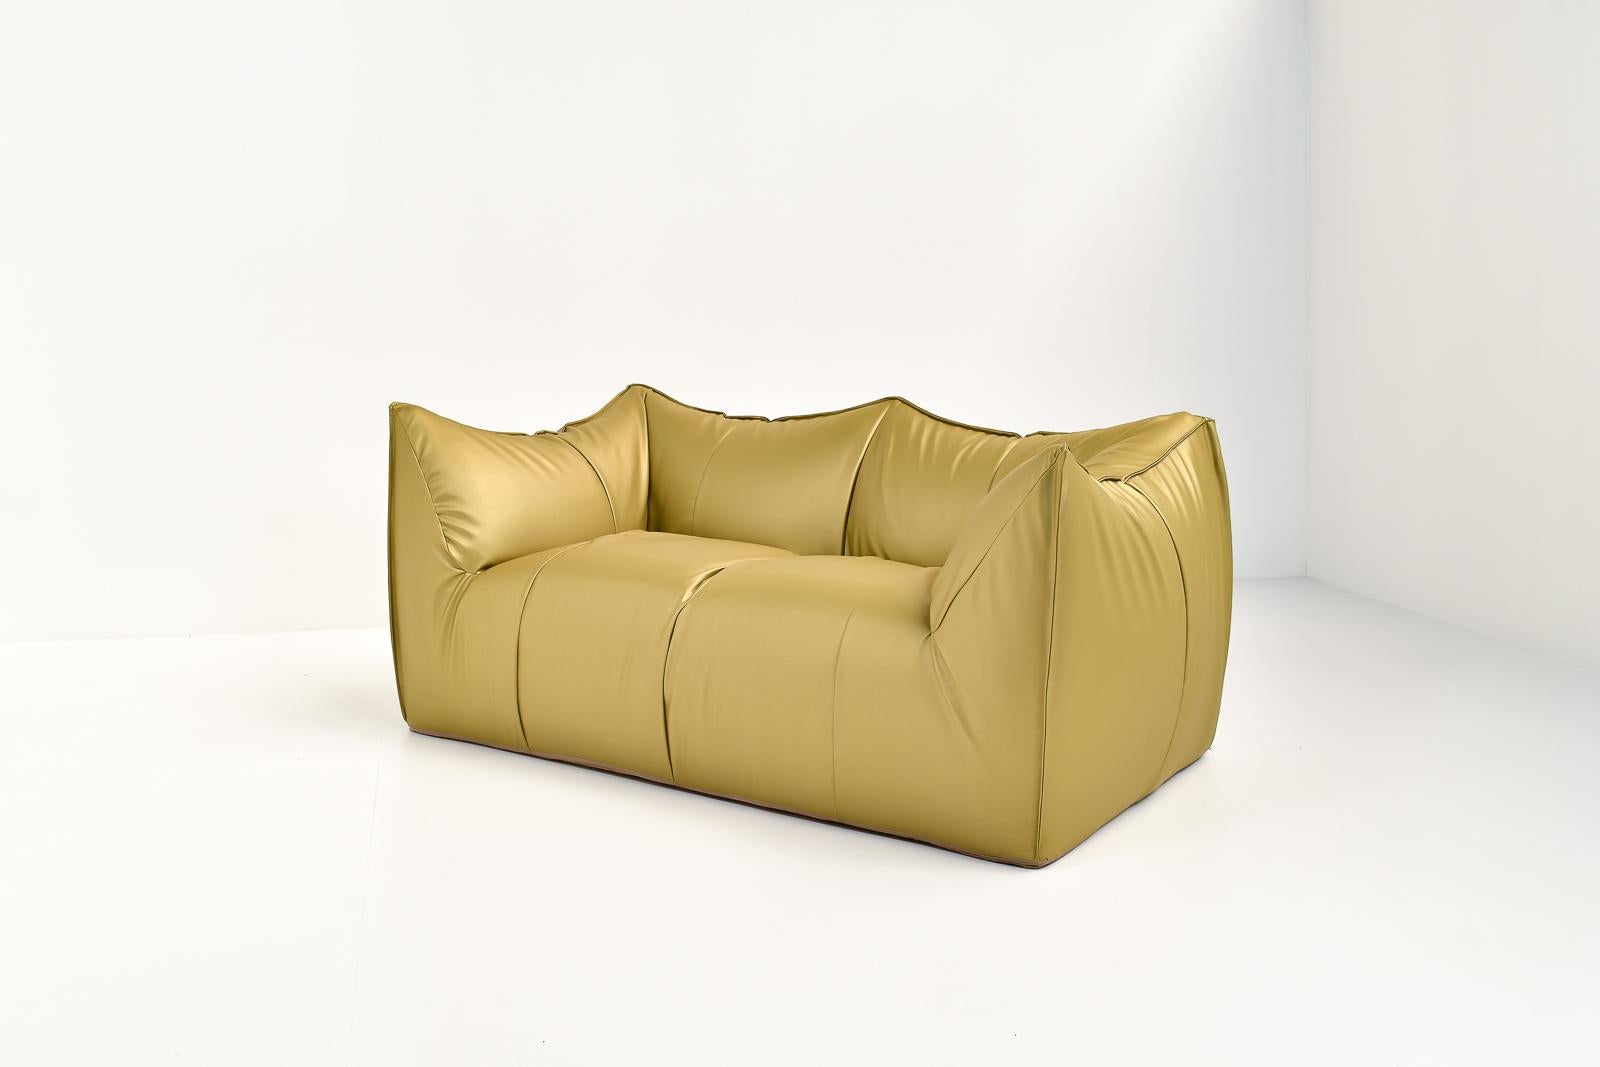 Two seater model, Bibambola, designed by Mario Bellini for B&B Italia, ca 1970s.
The Bibambola is a design classic. With the golden reupholstery we wanted to make classic meet contemporary. 
This way it can be the stand-out item you are looking